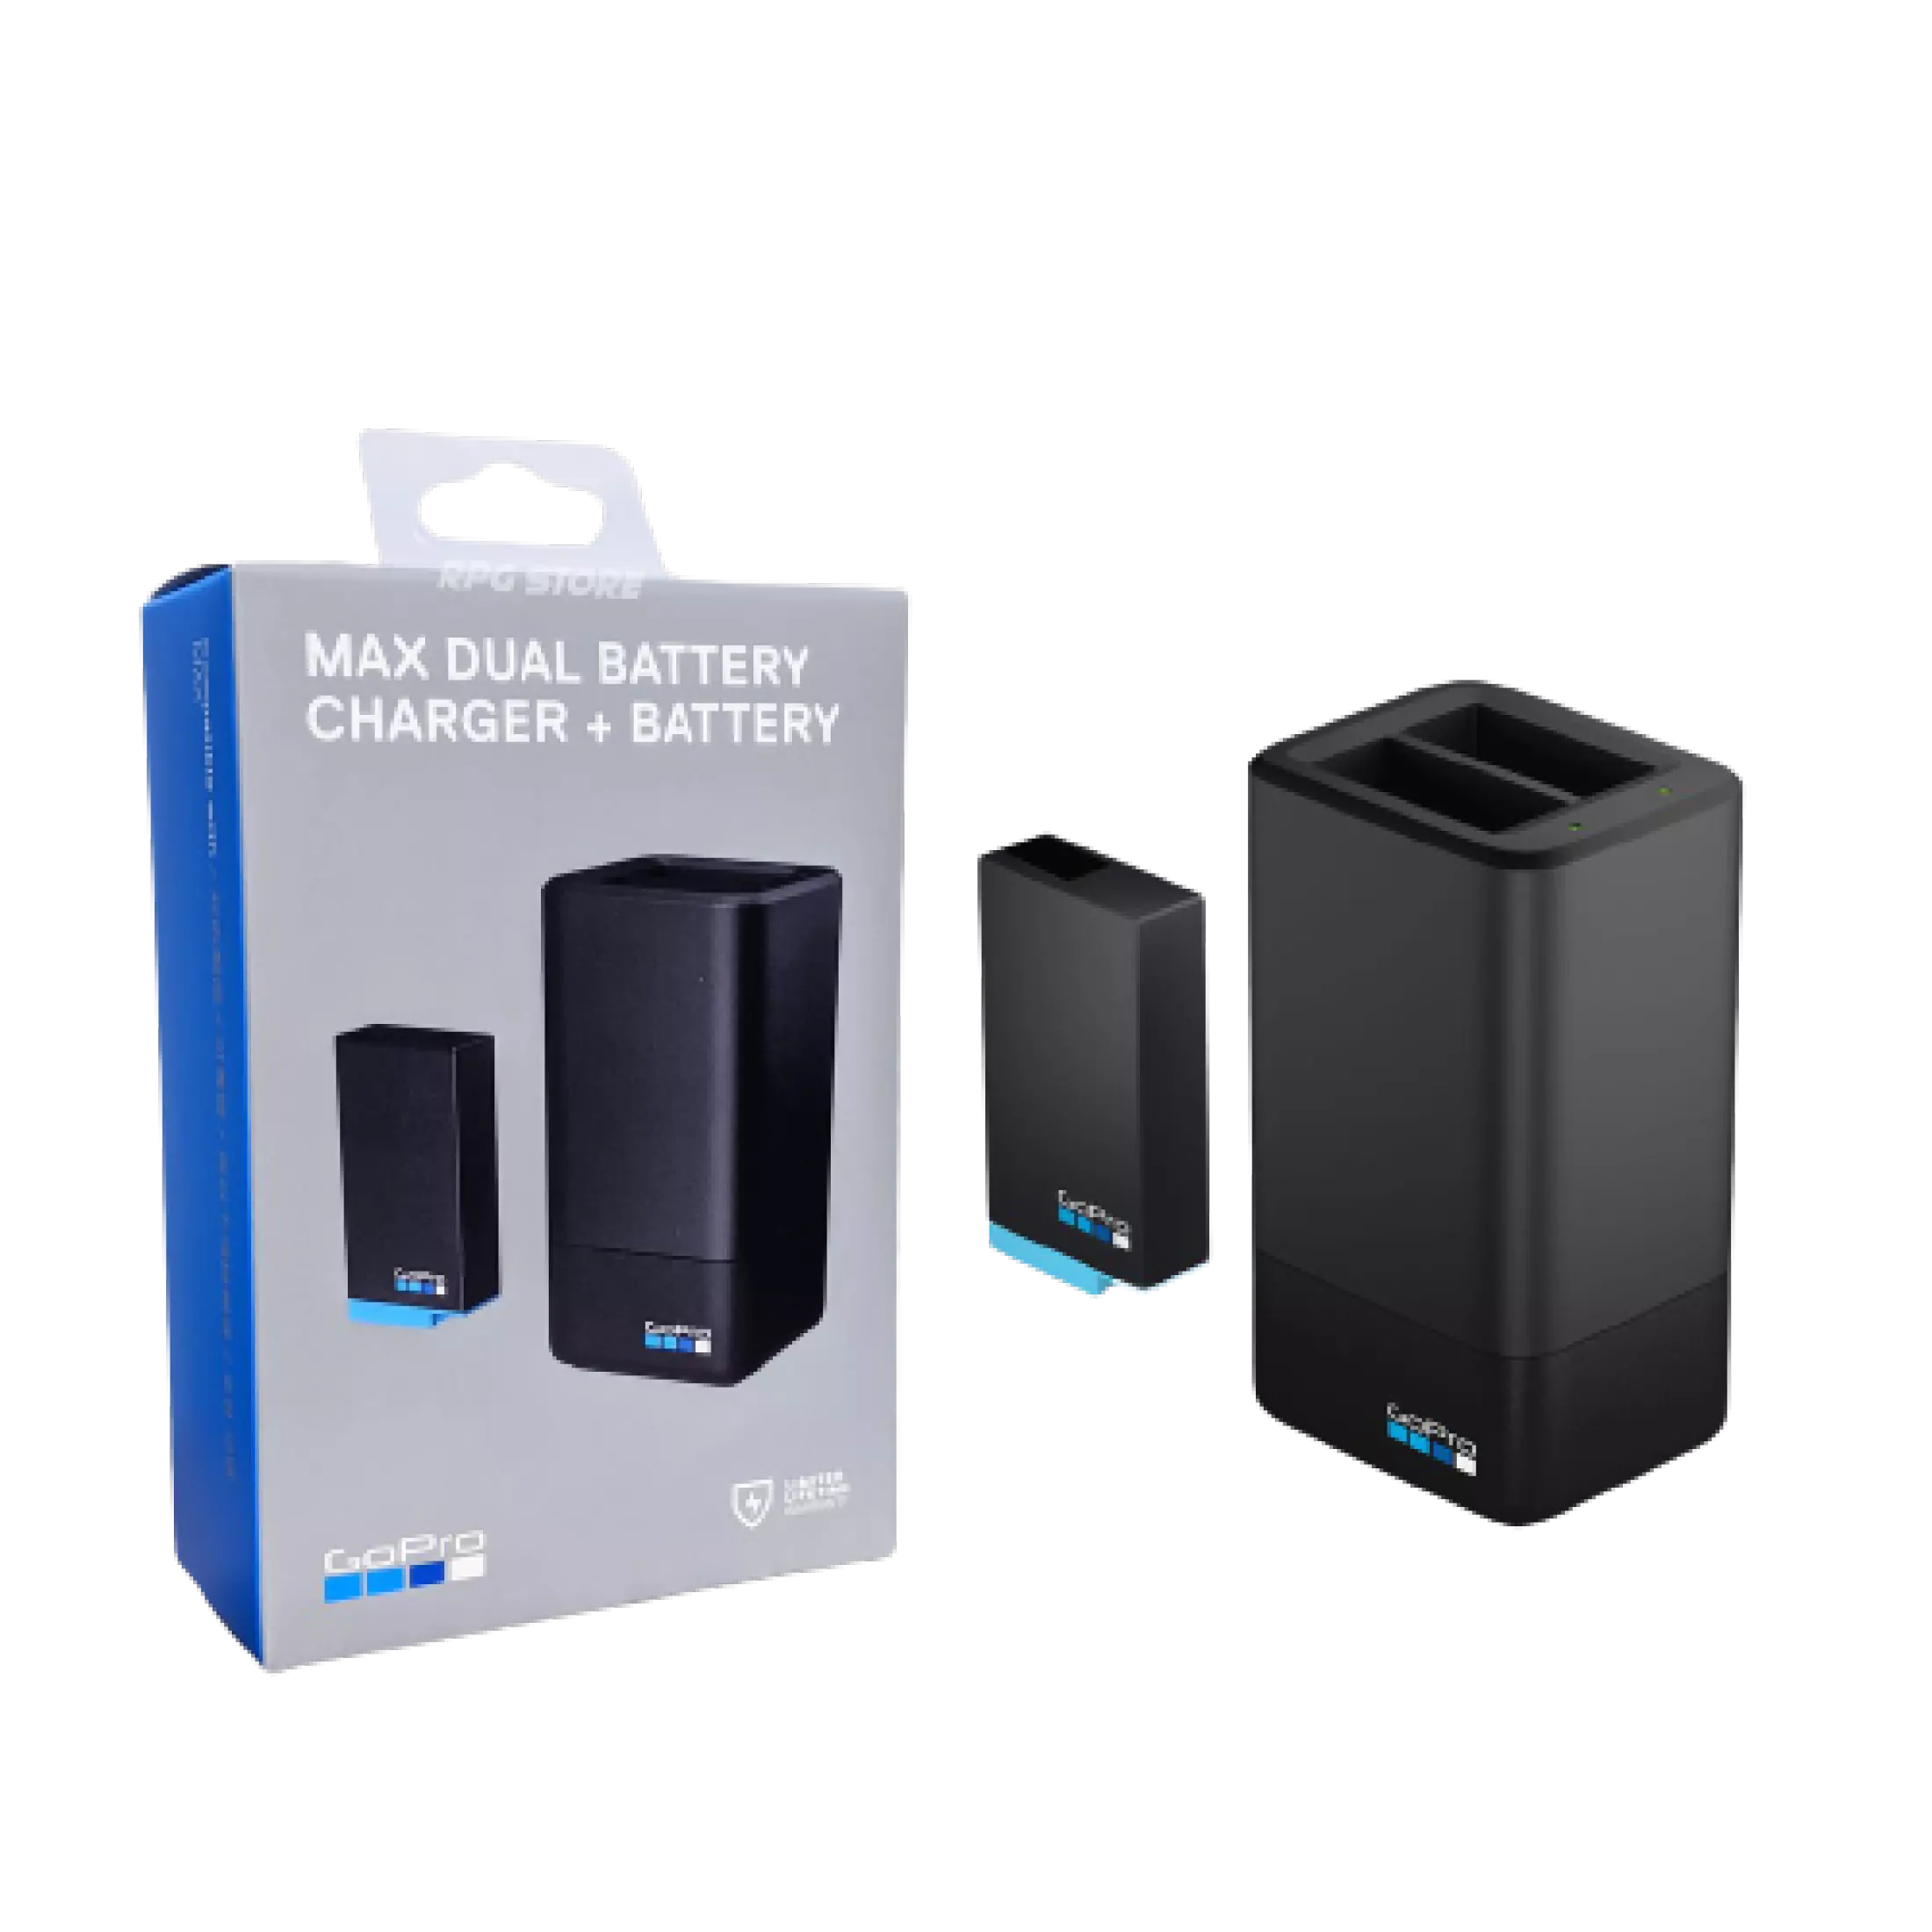 GOPRO MAX DUAL BATTERY CHARGER + BATTERY | Lazada PH